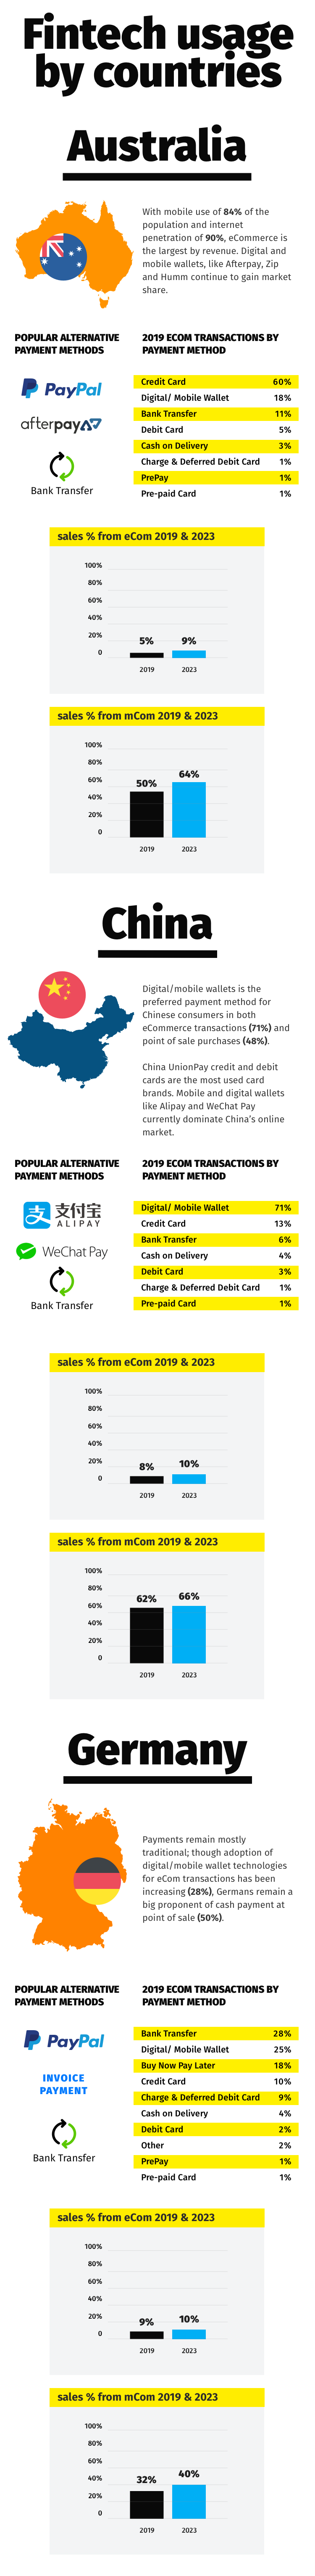 Infographic: Fintech Overview and Trends 2021 - 2022 - 25